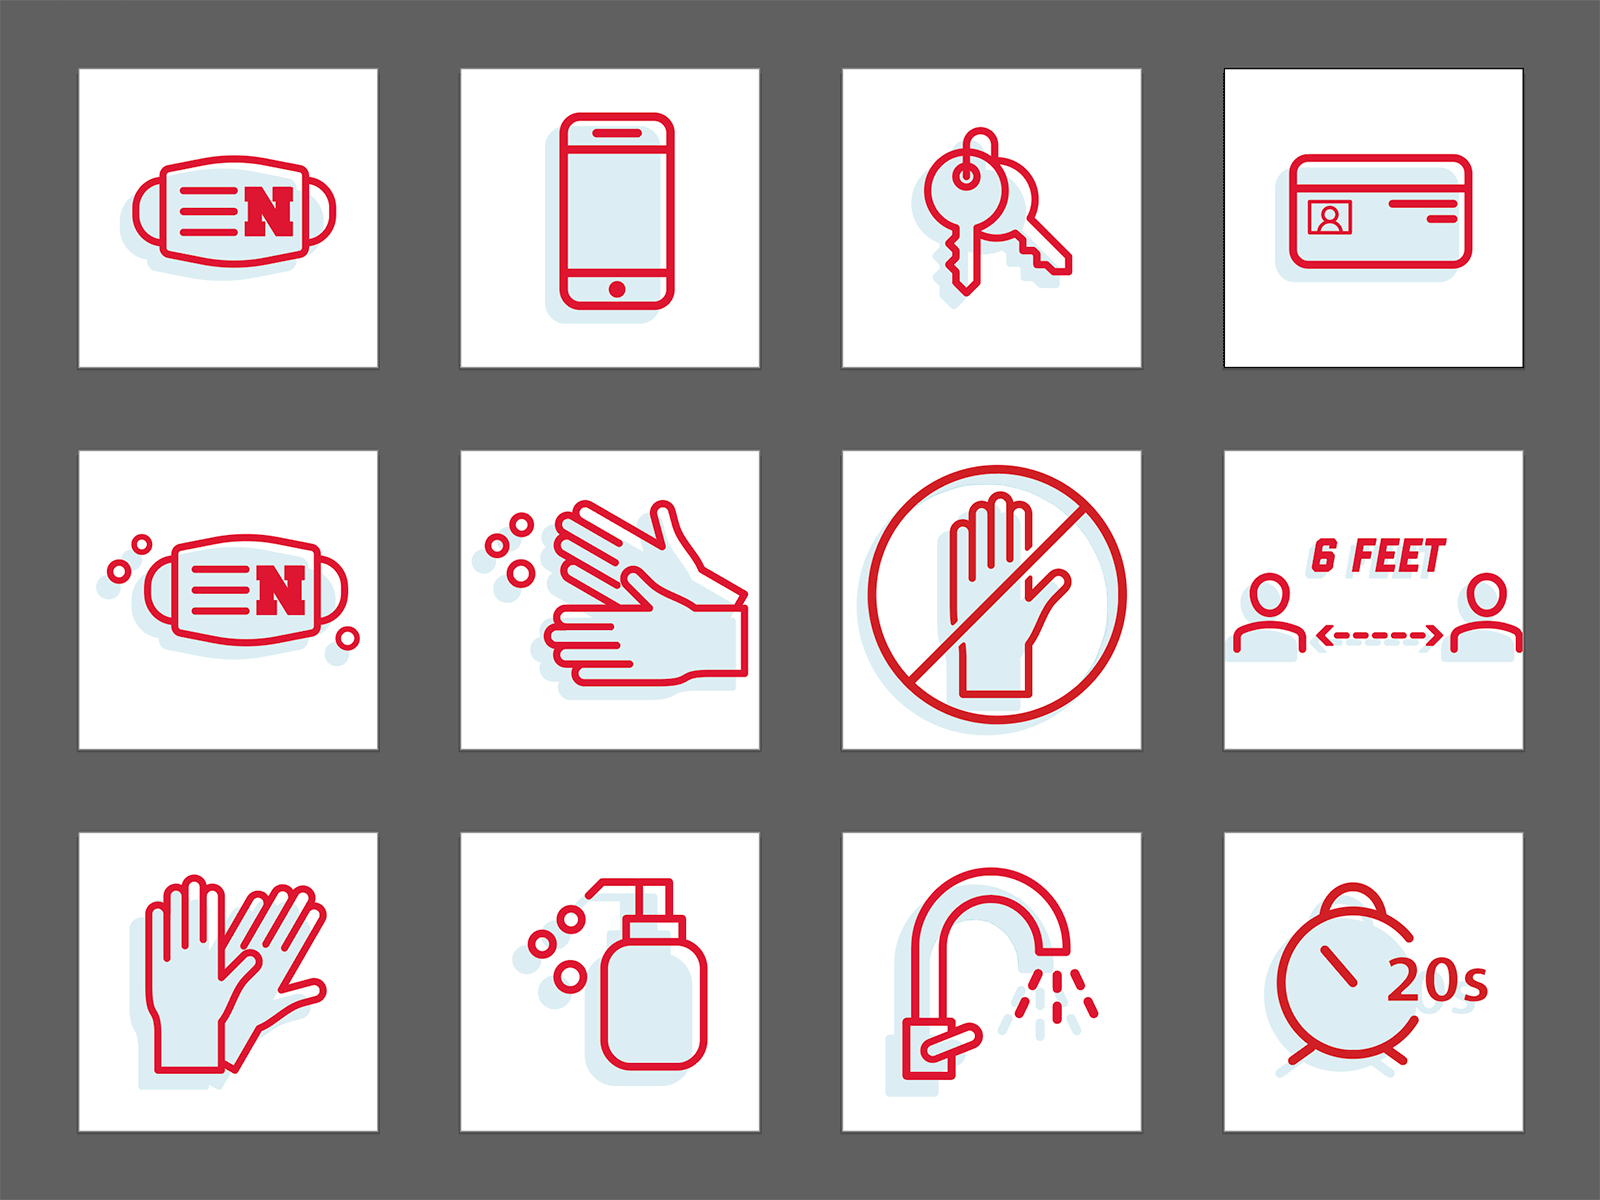 Grid of new COVID-19 icons.